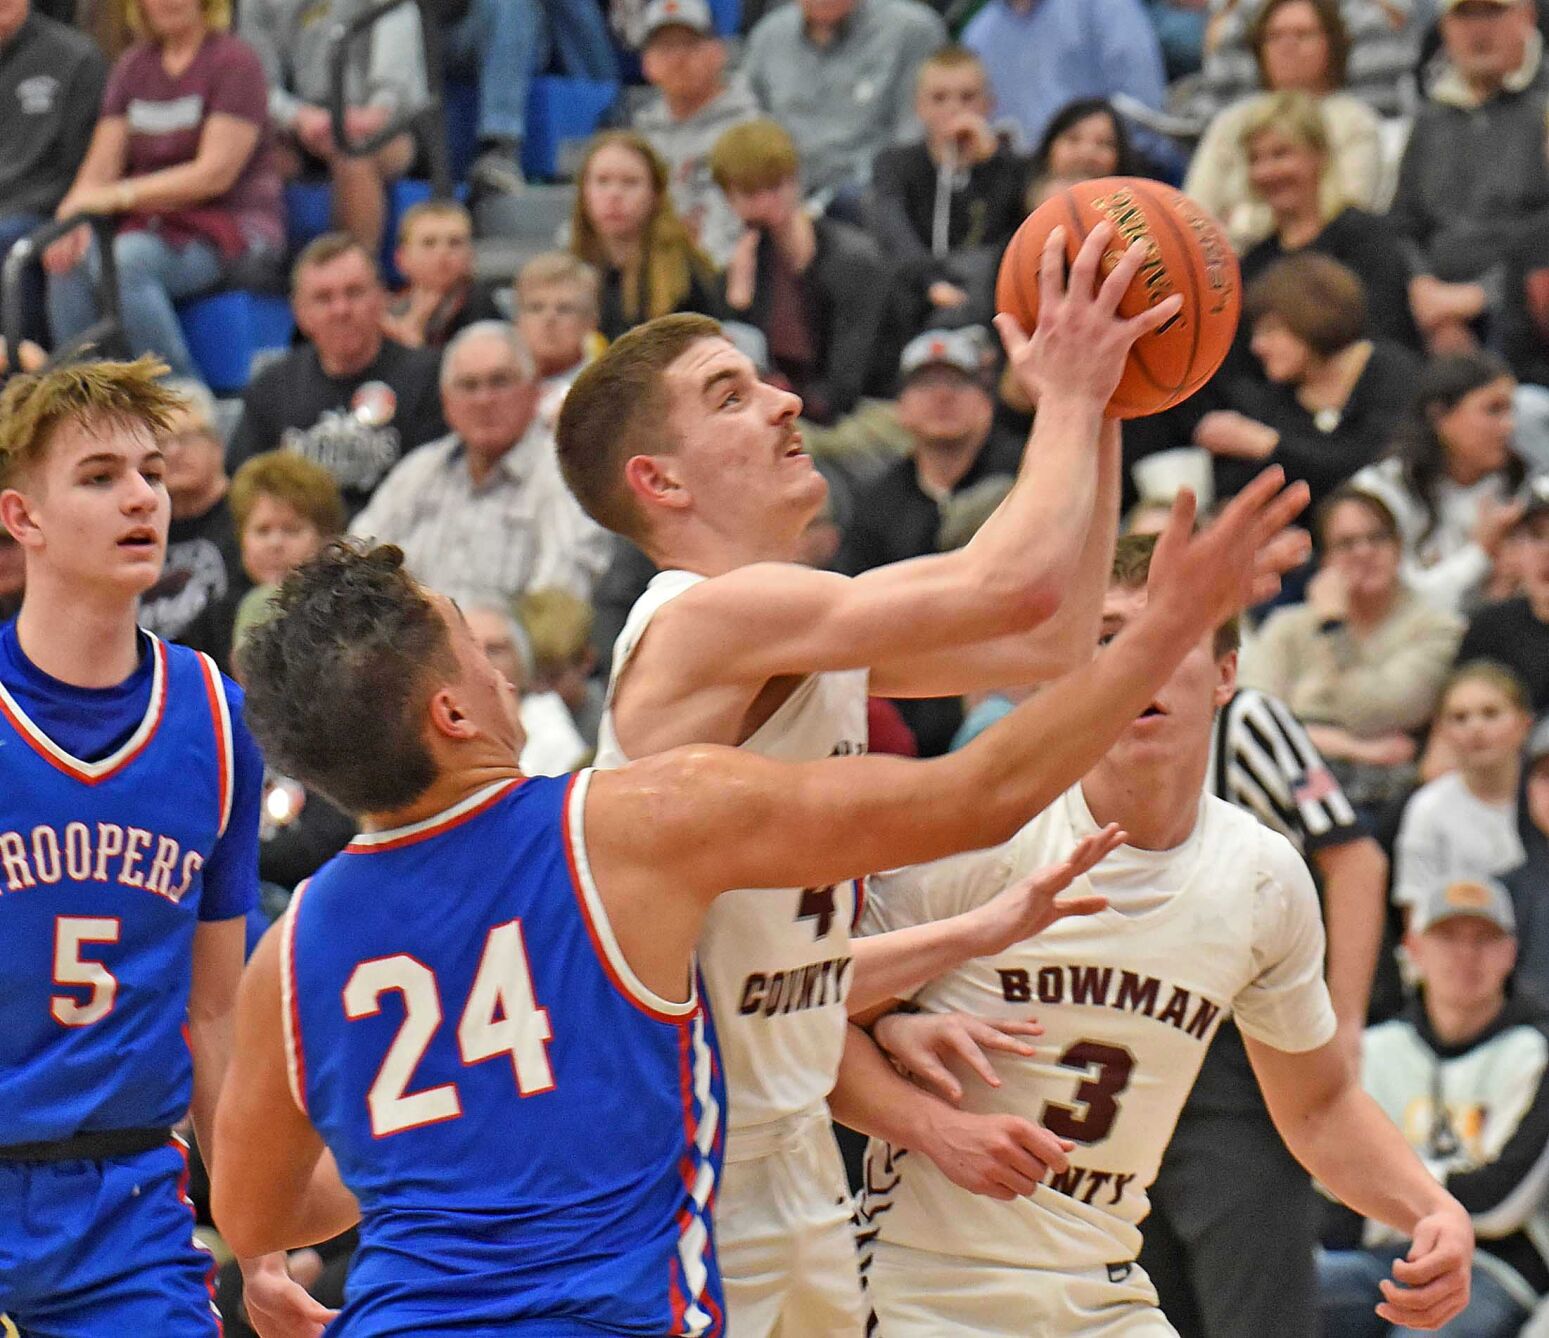 Bismarck High and Other Basketball Teams Compete in Region Tournaments and State Qualifiers